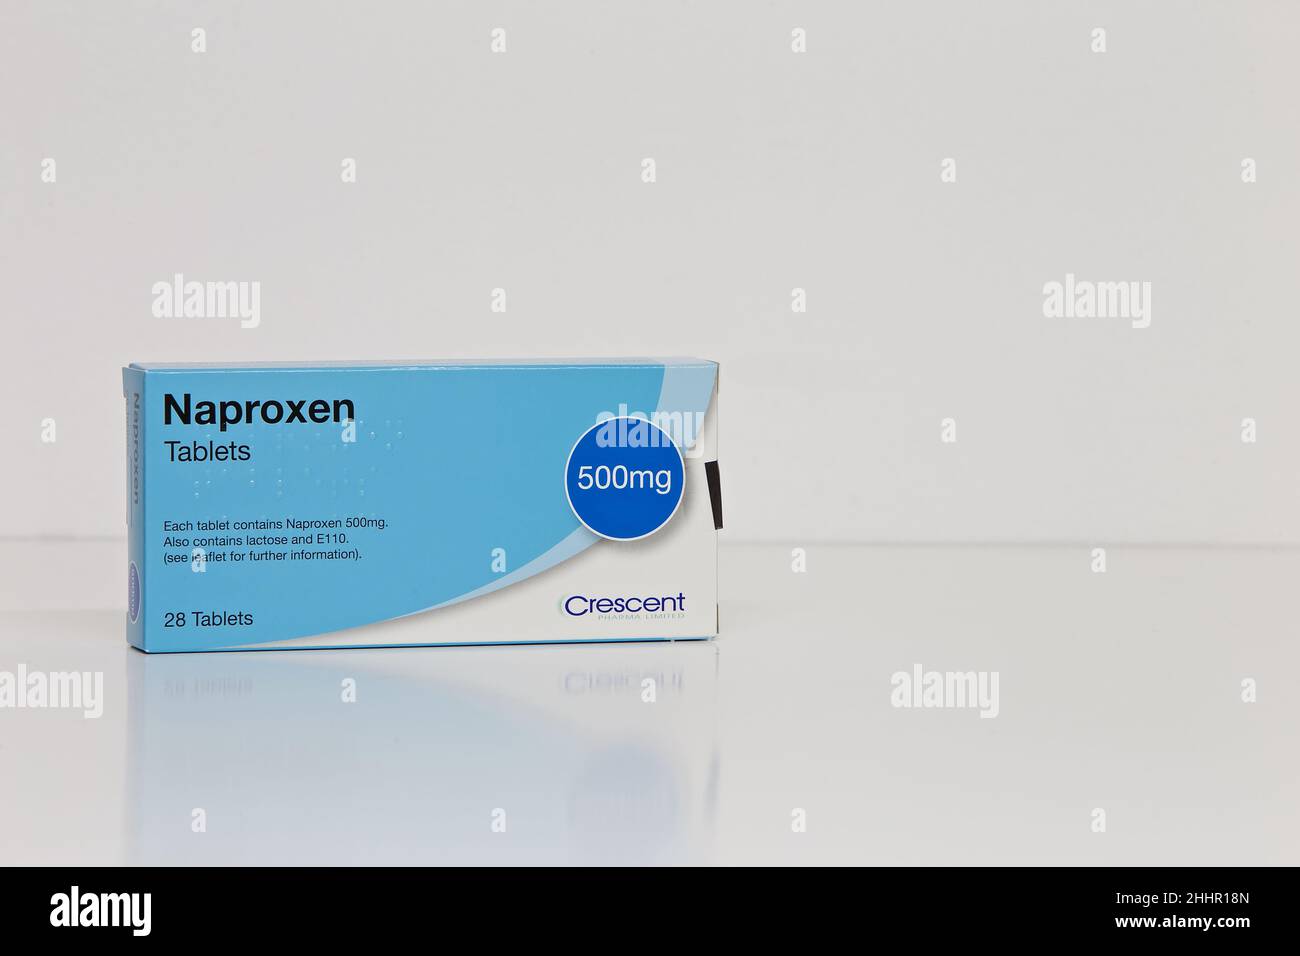 500mg Naproxen Tablets belong to a group of medicines called Non-Steroidal Anti-inflammatory Drugs or NSAIDs. Stock Photo